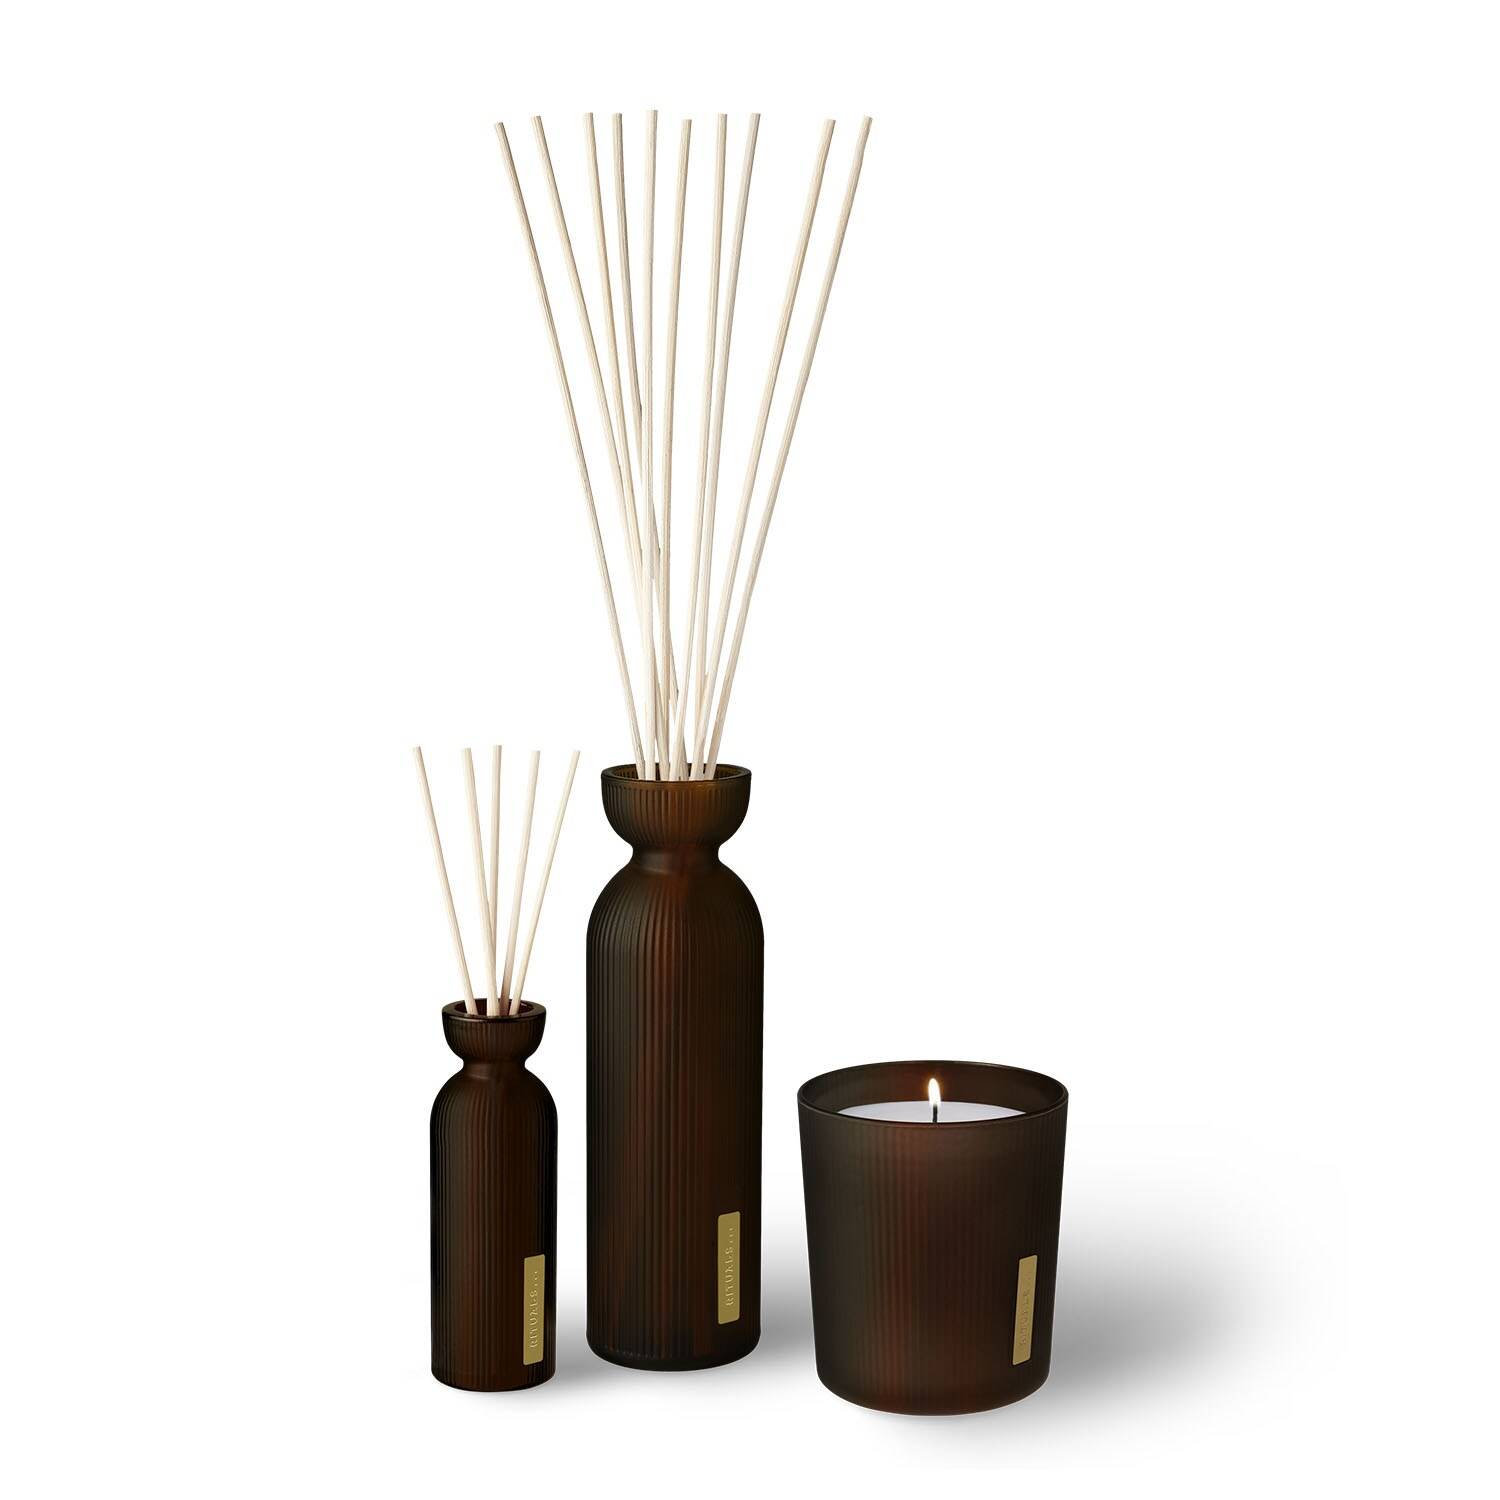 RITUALS The Ritual of Mehr Reed Diffuser Refill 250ml